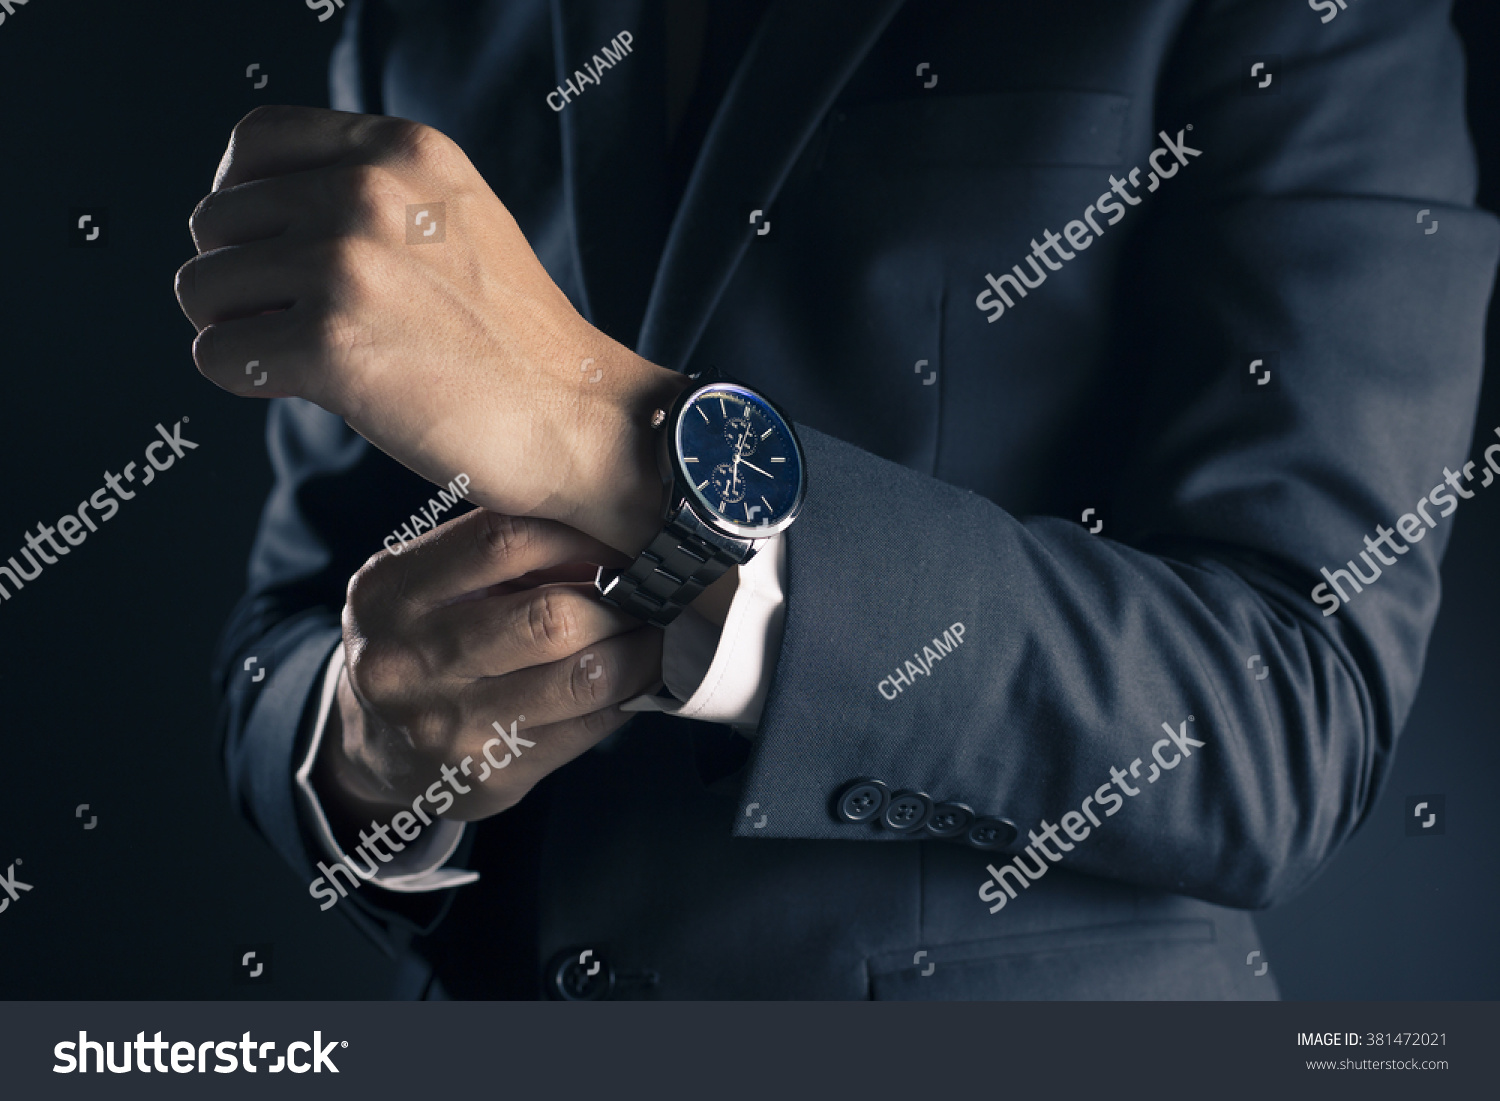 Businessman checking time from watch #381472021